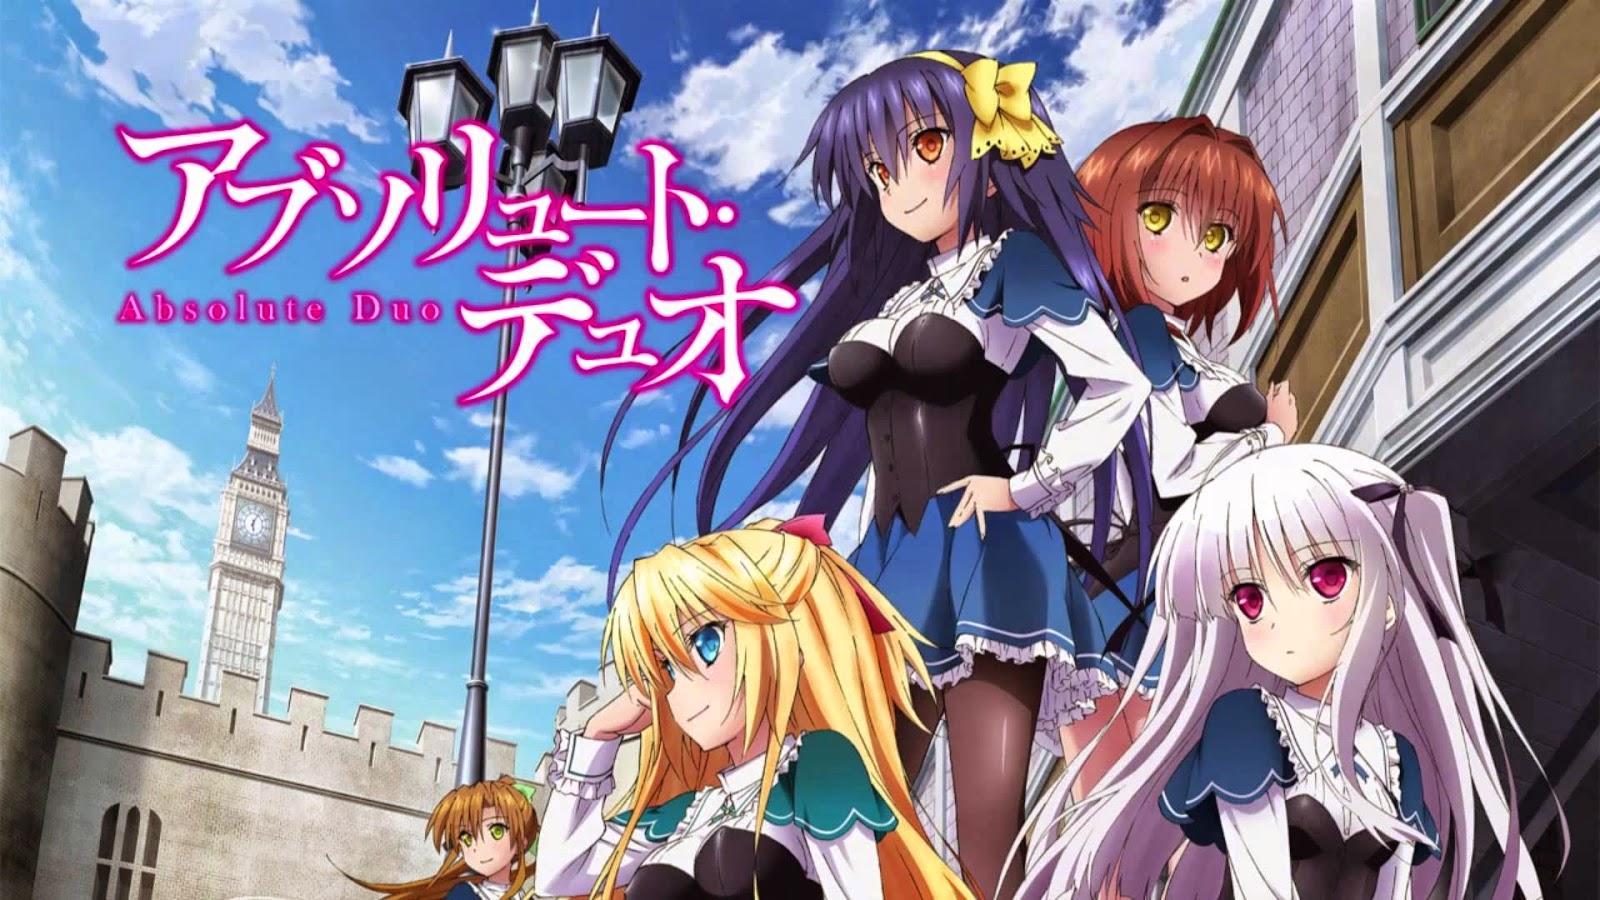 Buy Absolute Duo Graphic Novel Volume 2